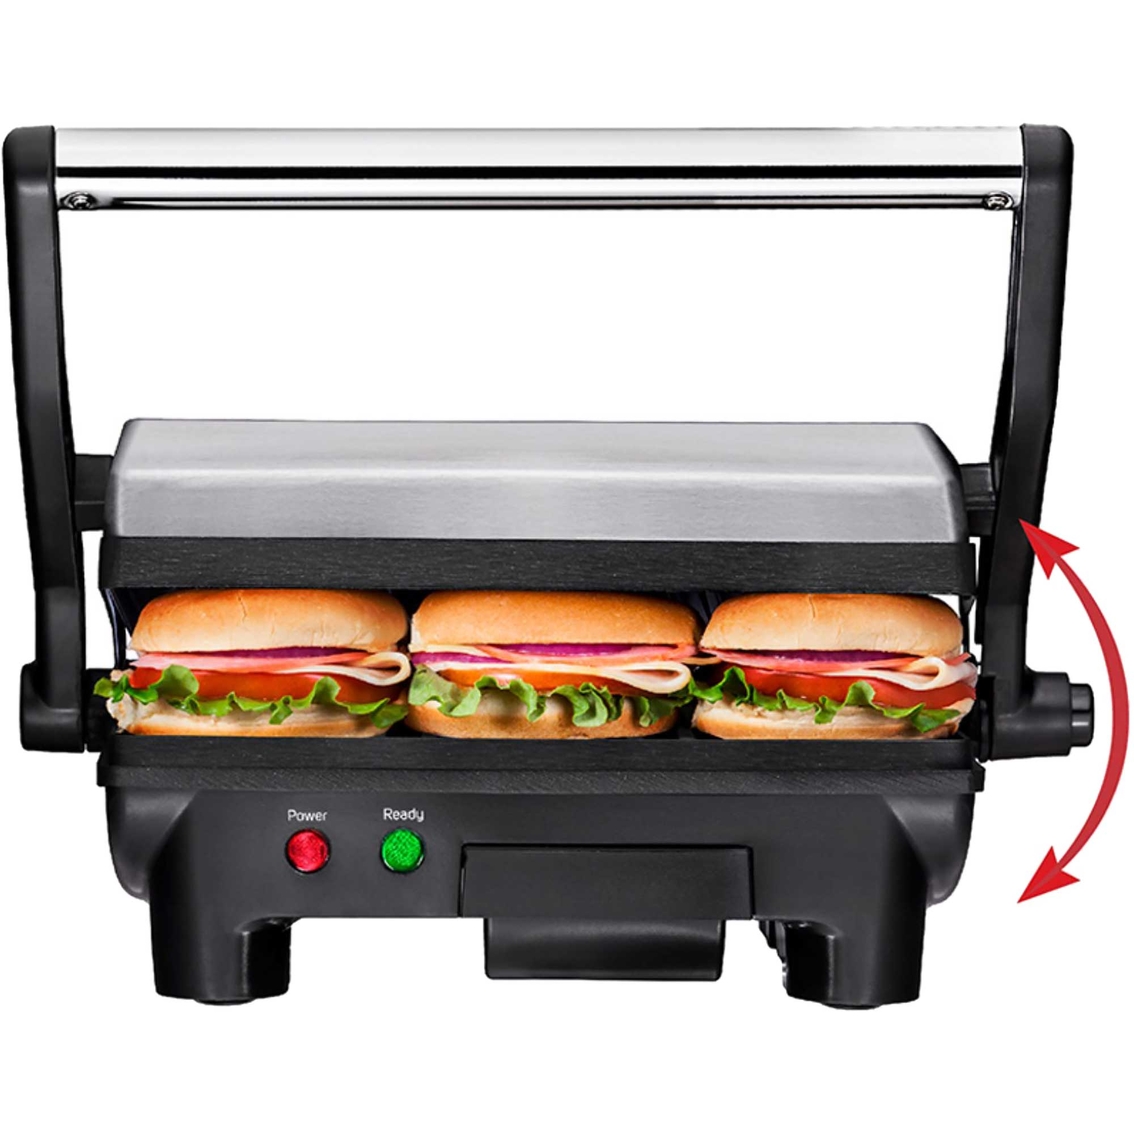 Chefman Panini Press Grill and Gourmet Sandwich Maker - Image 6 of 9